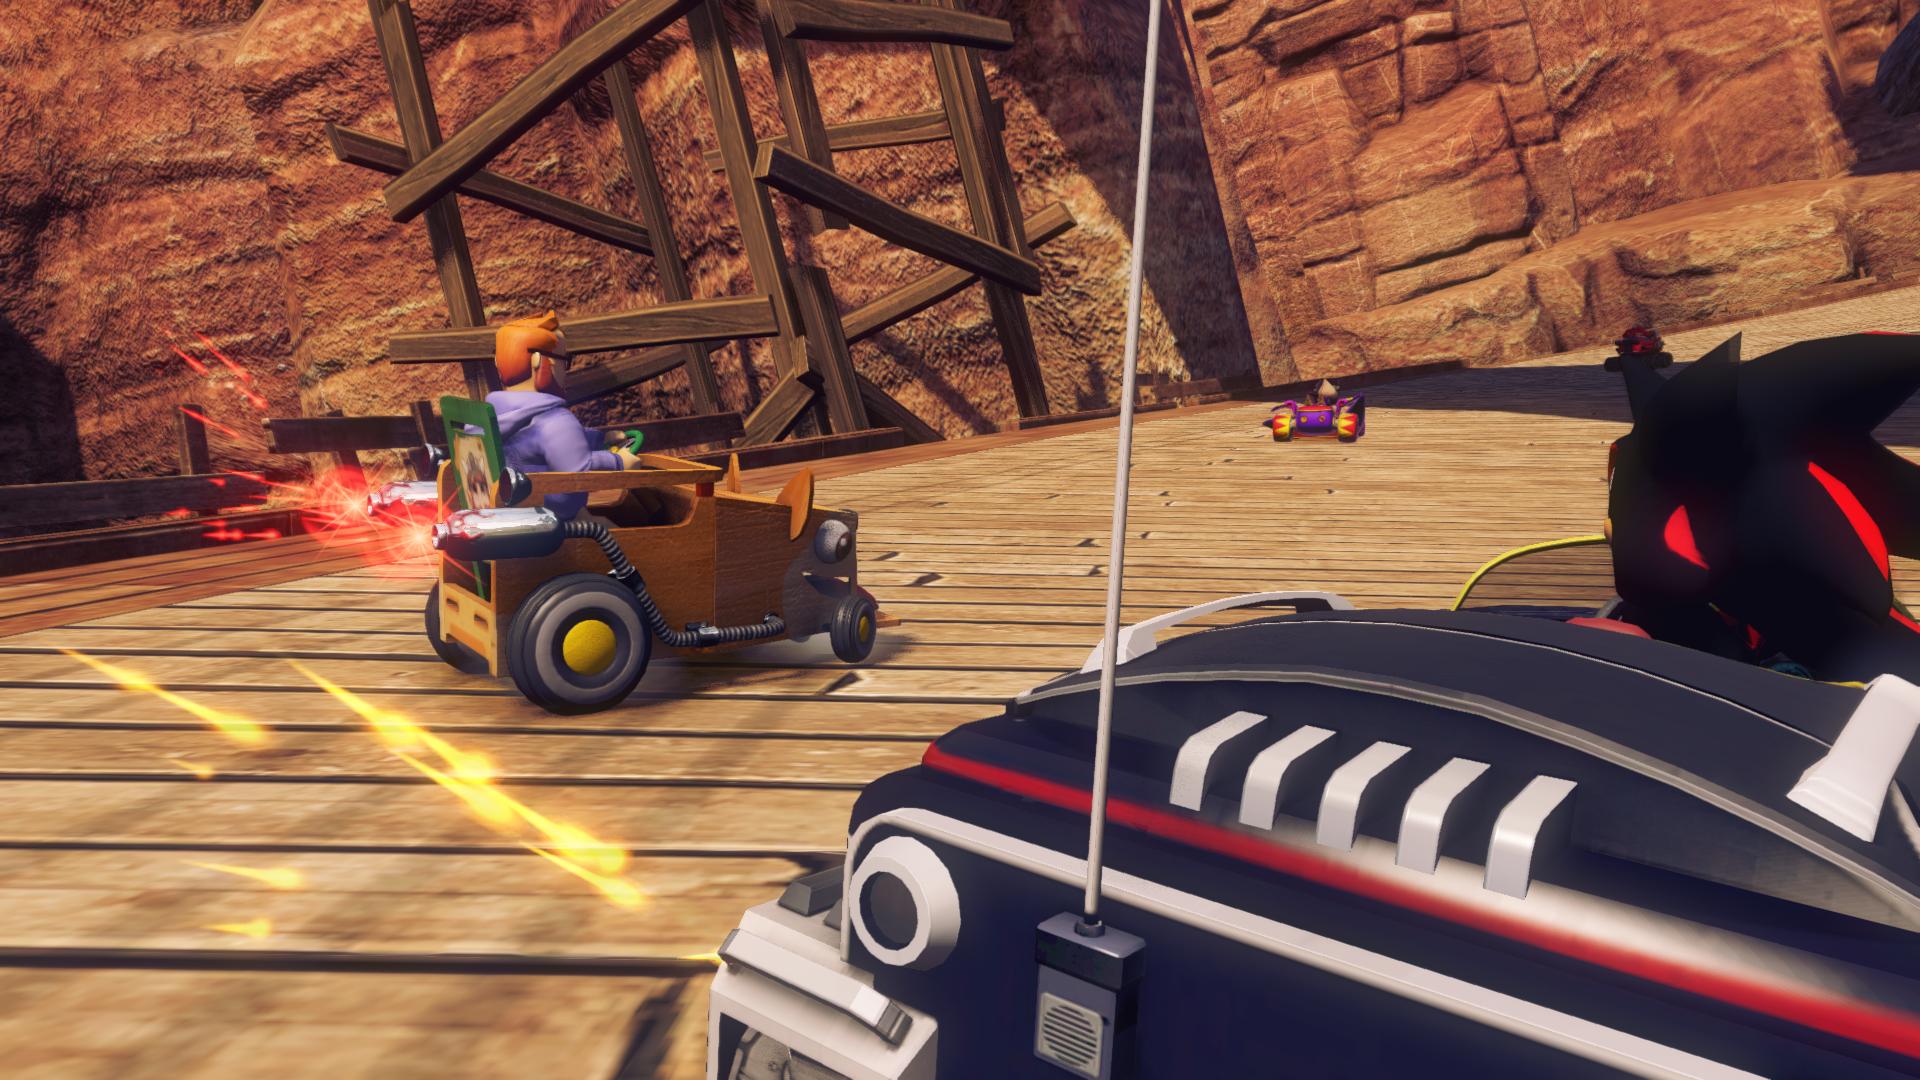 Sonic and All-Stars Racing Transformed - Yogscast DLC Steam Gift, 51.92 usd